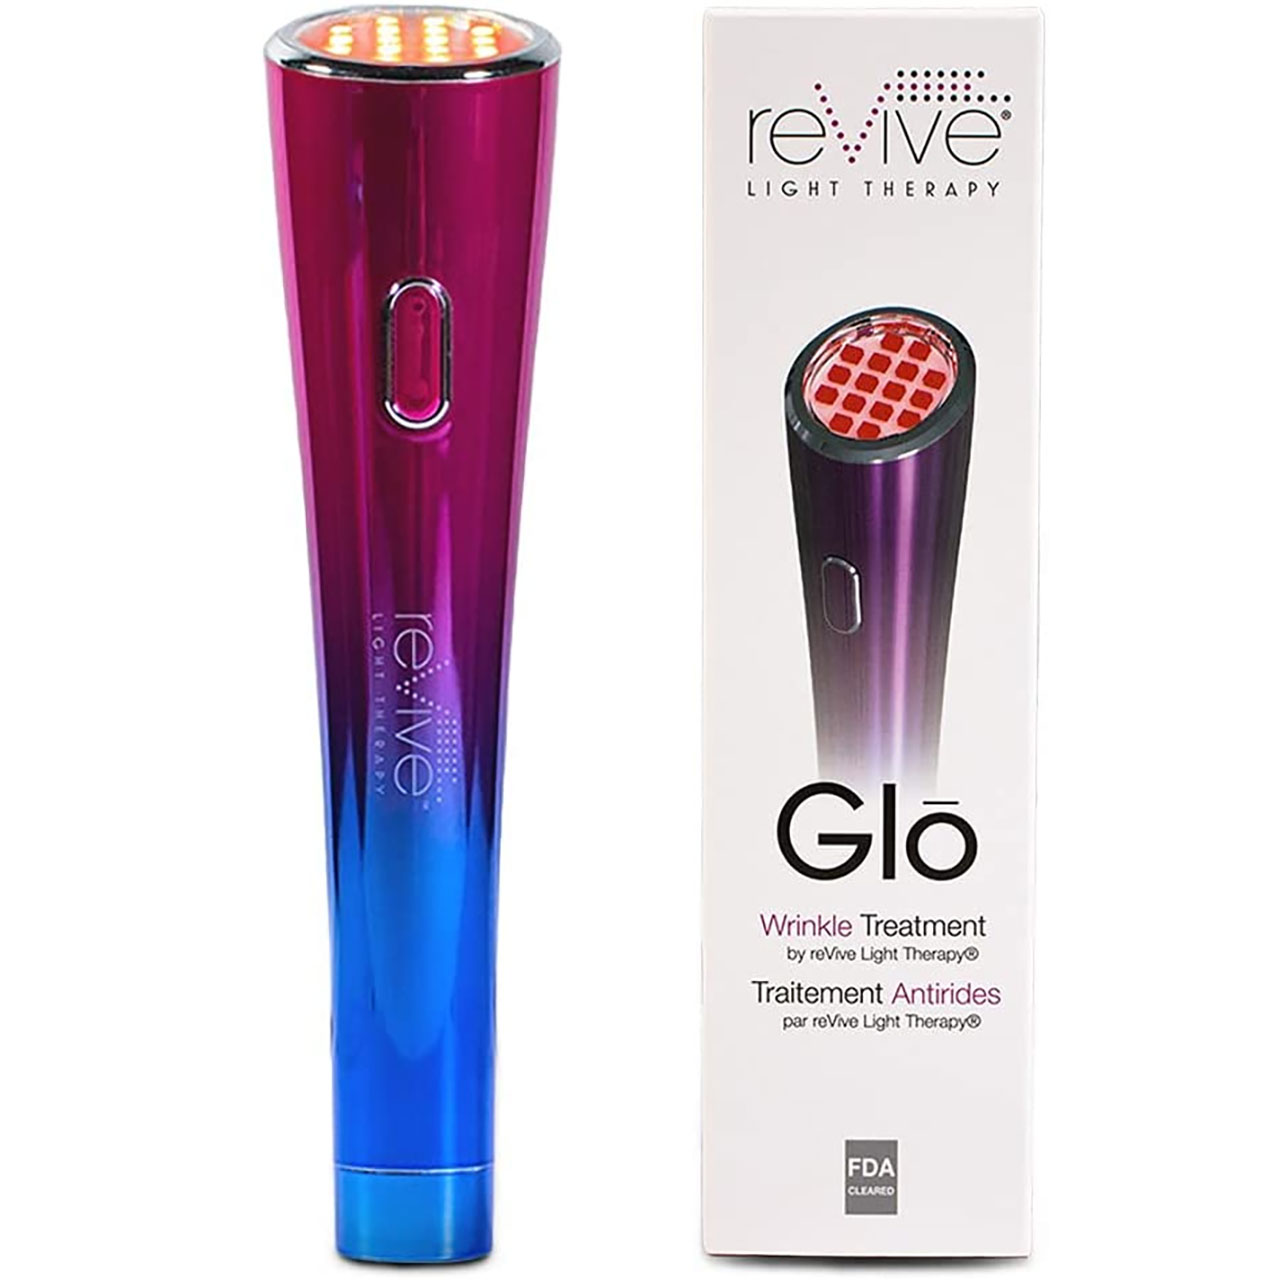 reVive Light Therapy Glo Wrinkle and Anti-Aging Light Therapy Device (RVGLO) Questions & Answers